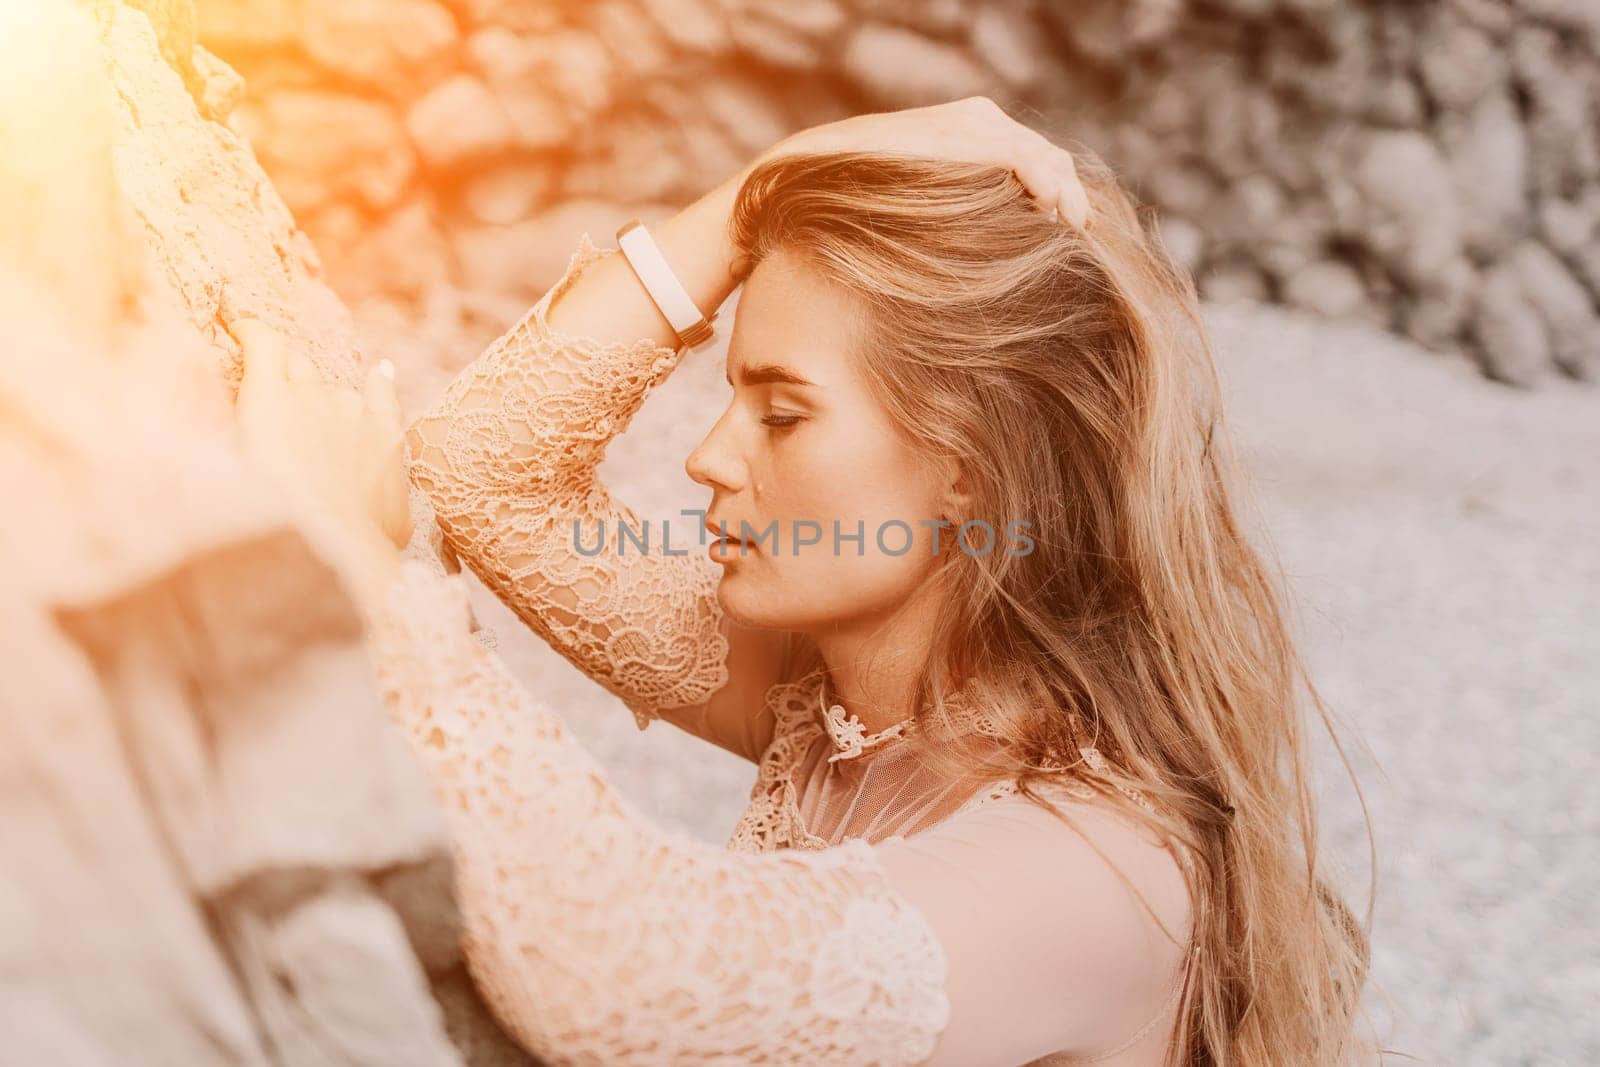 Woman summer travel sea. Happy tourist in beige dress enjoy taking picture outdoors for memories. Woman traveler posing on the beach surrounded by volcanic mountains, sharing travel adventure journey by panophotograph